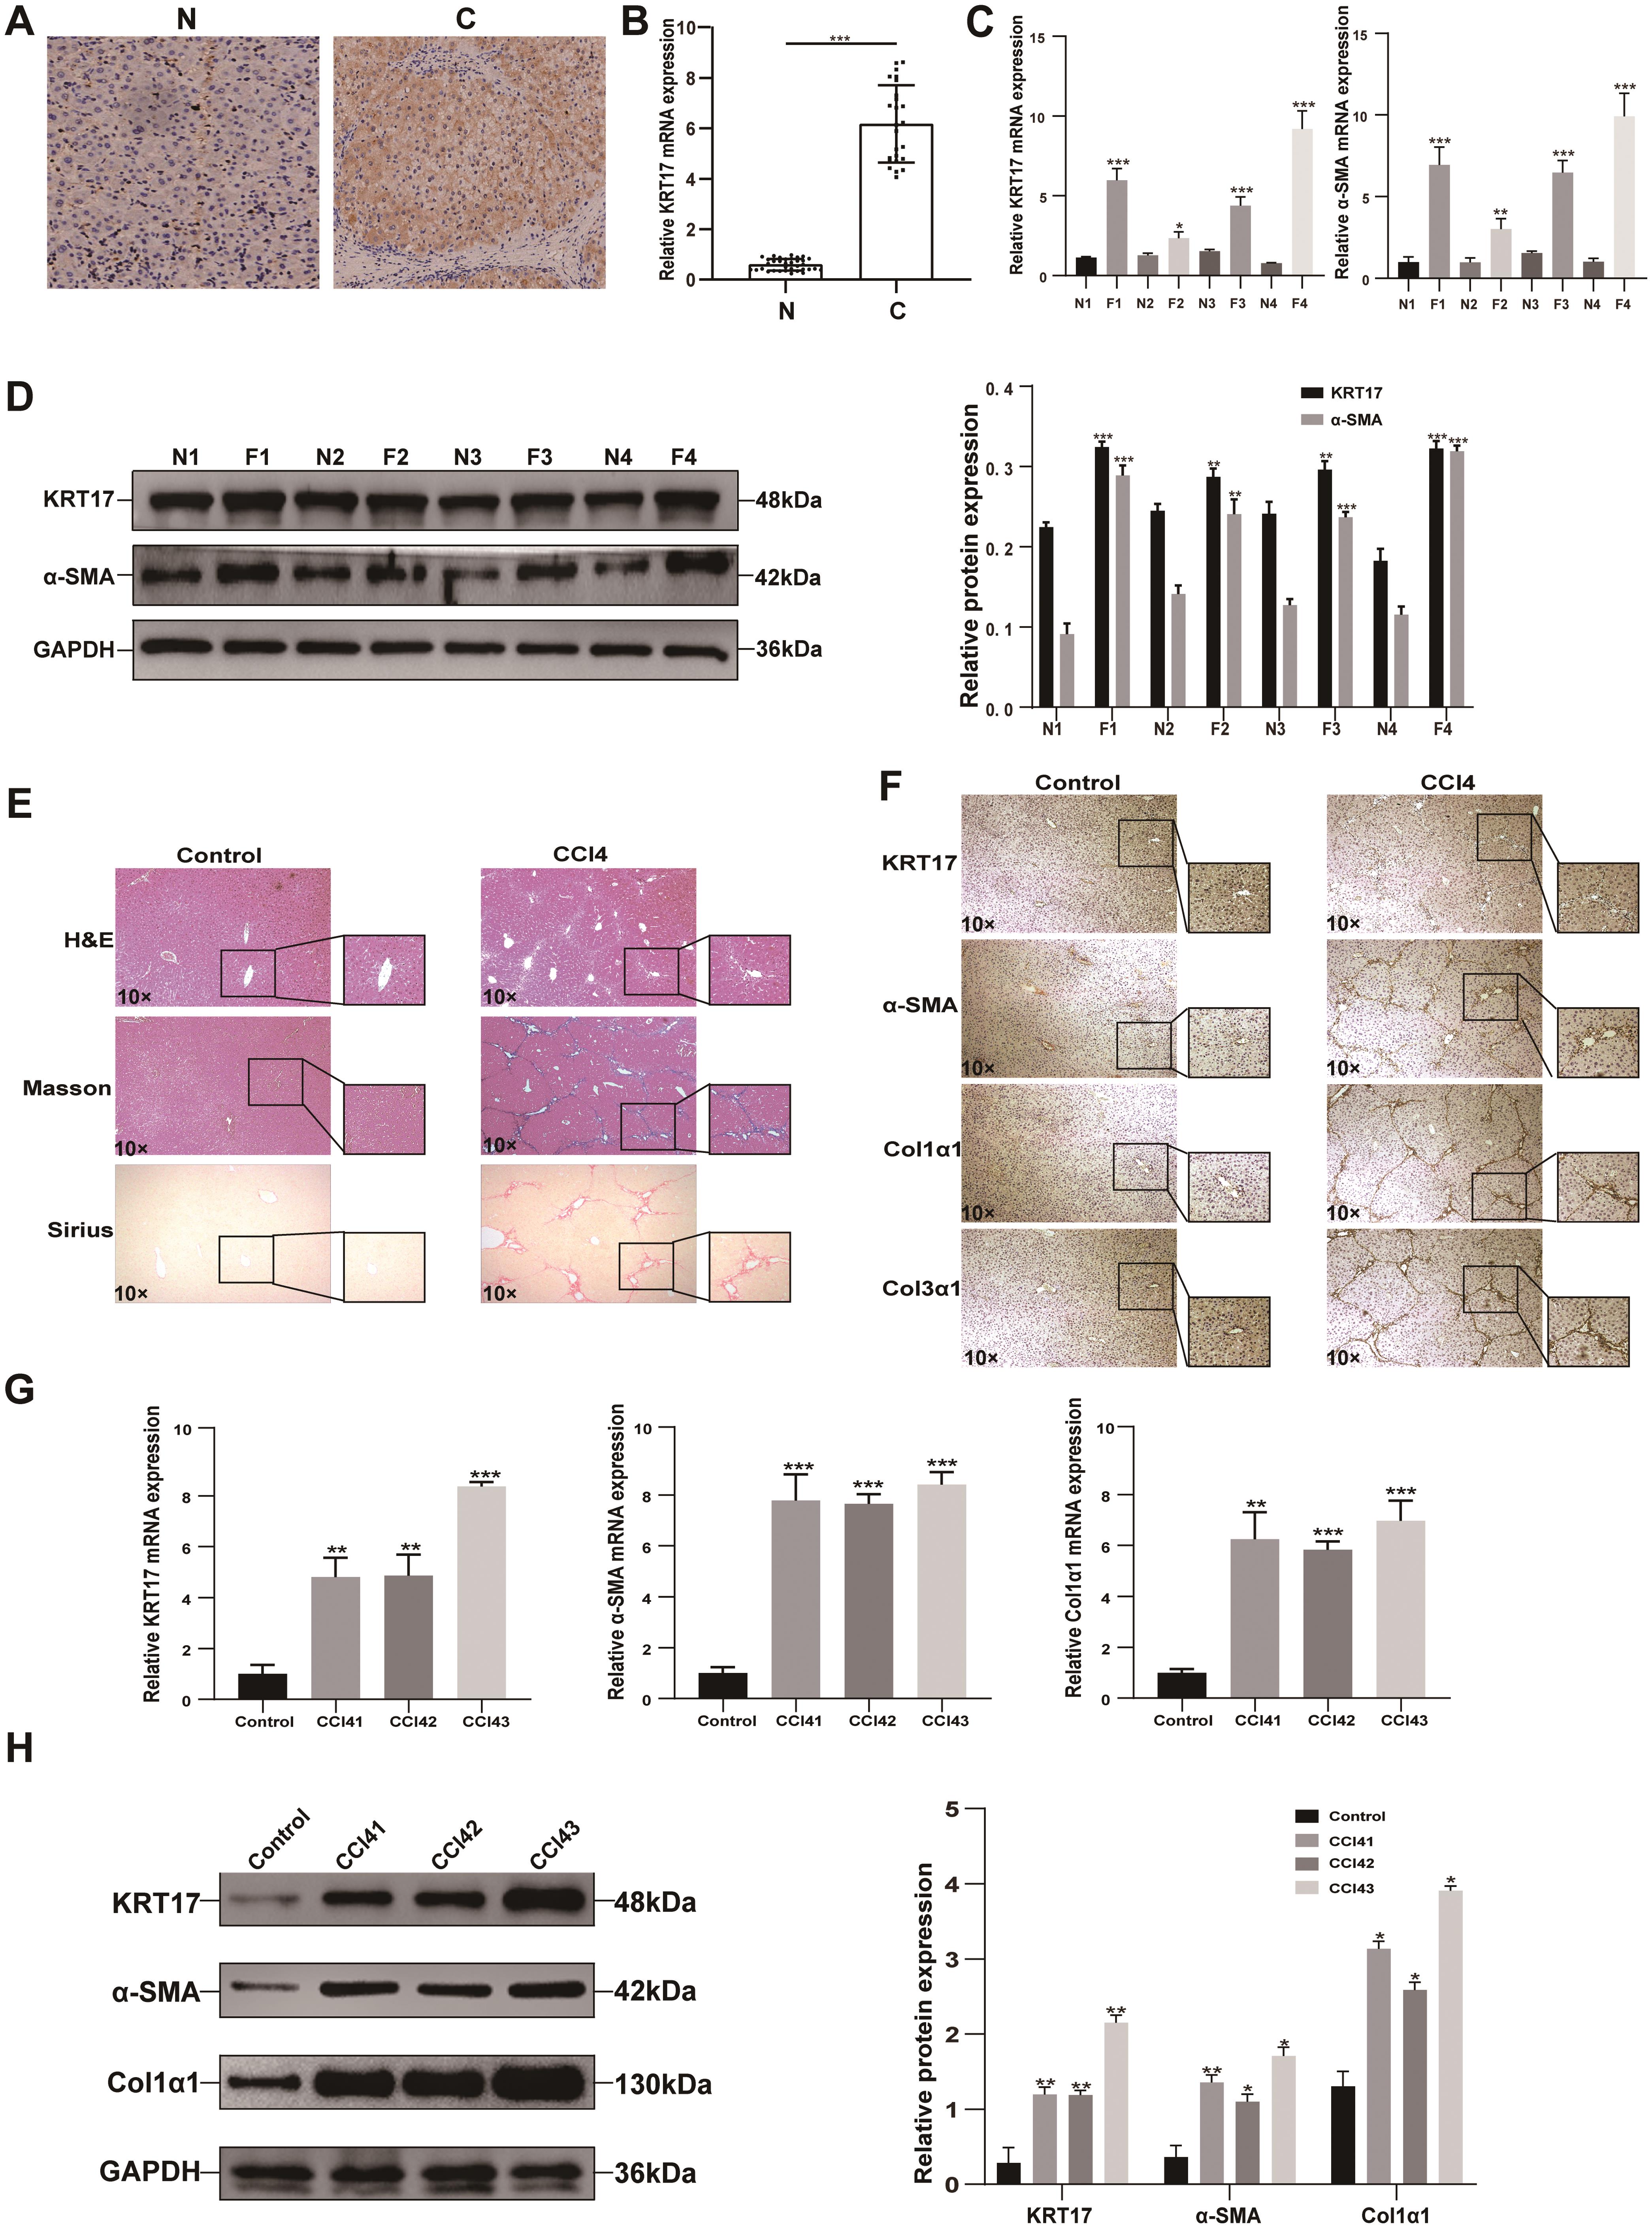 Upregulation of KRT17 in mouse and human fibrotic livers tissues.